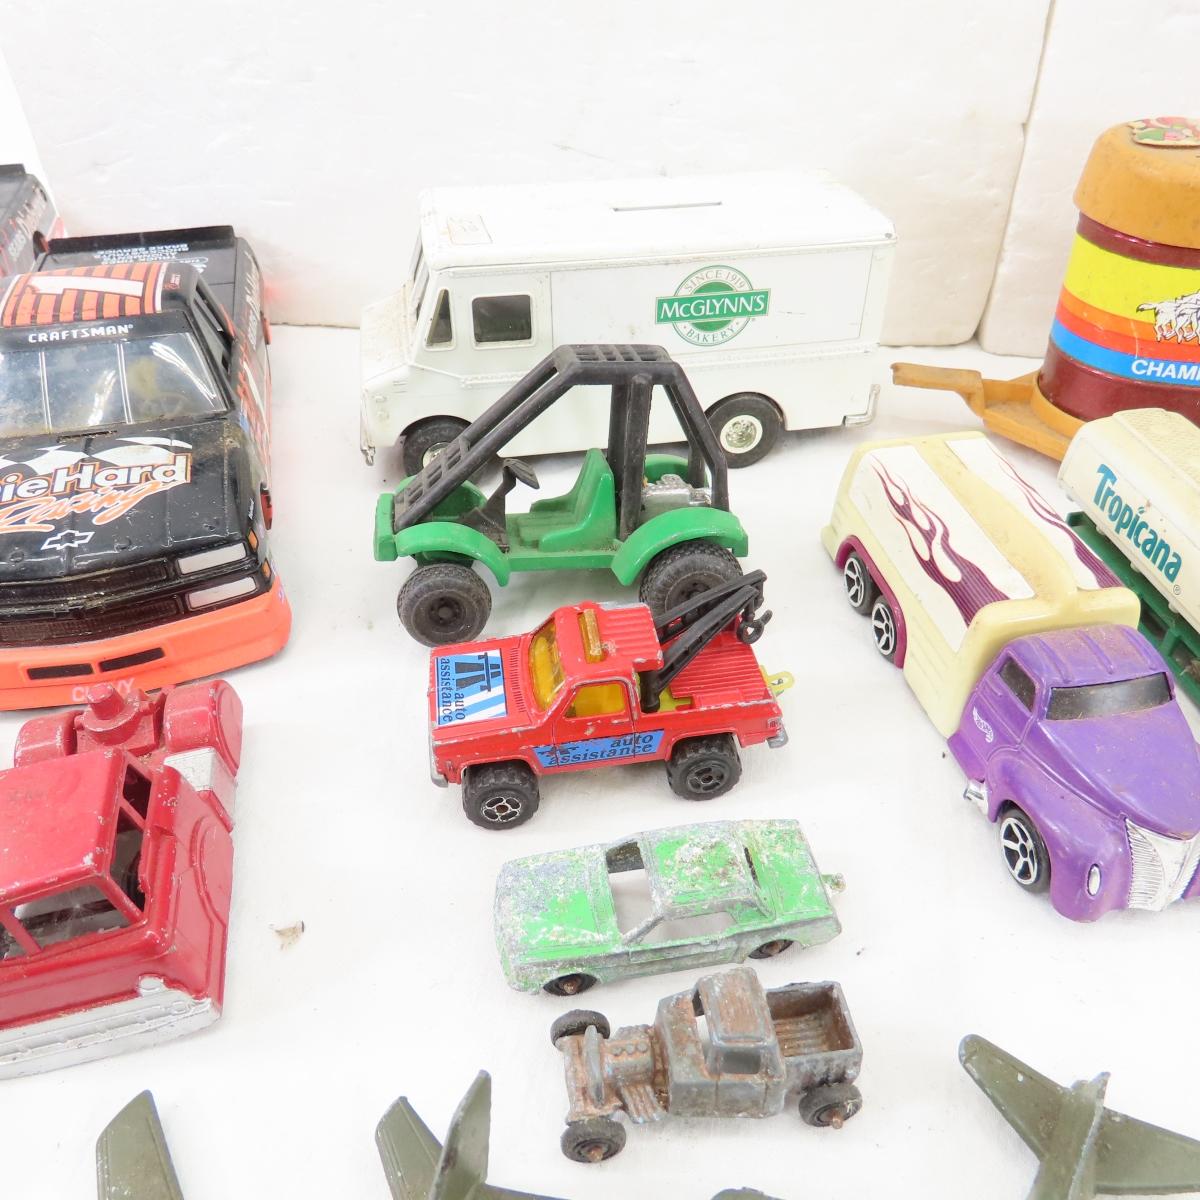 Midgetoy Army vehicles, 1:24 and other Diecast